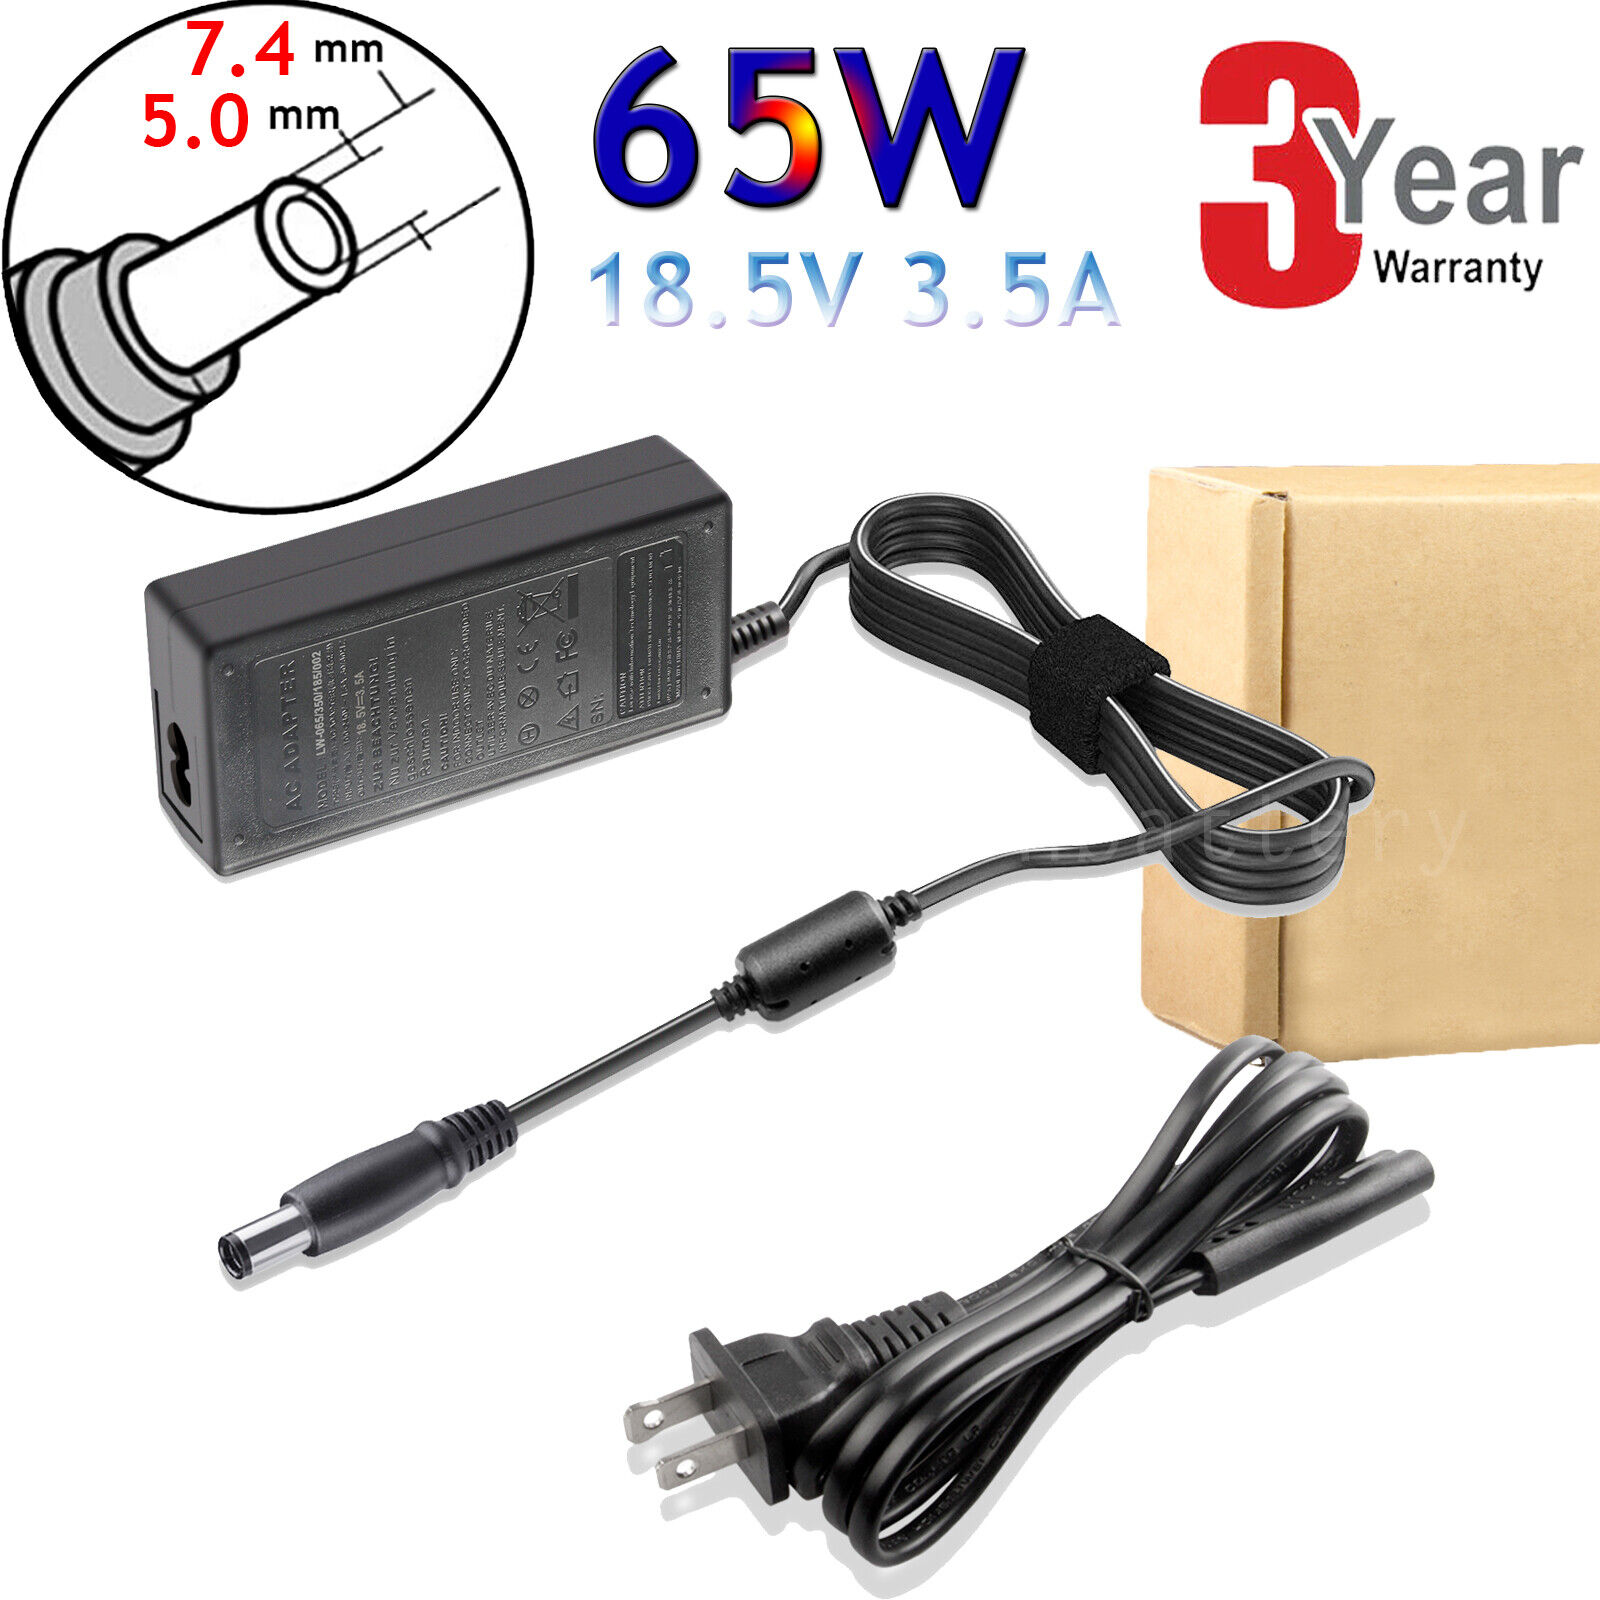 Laptop Power Supply Adapter Charger for HP Compaq 6710b 6910p nc6400 6510b US